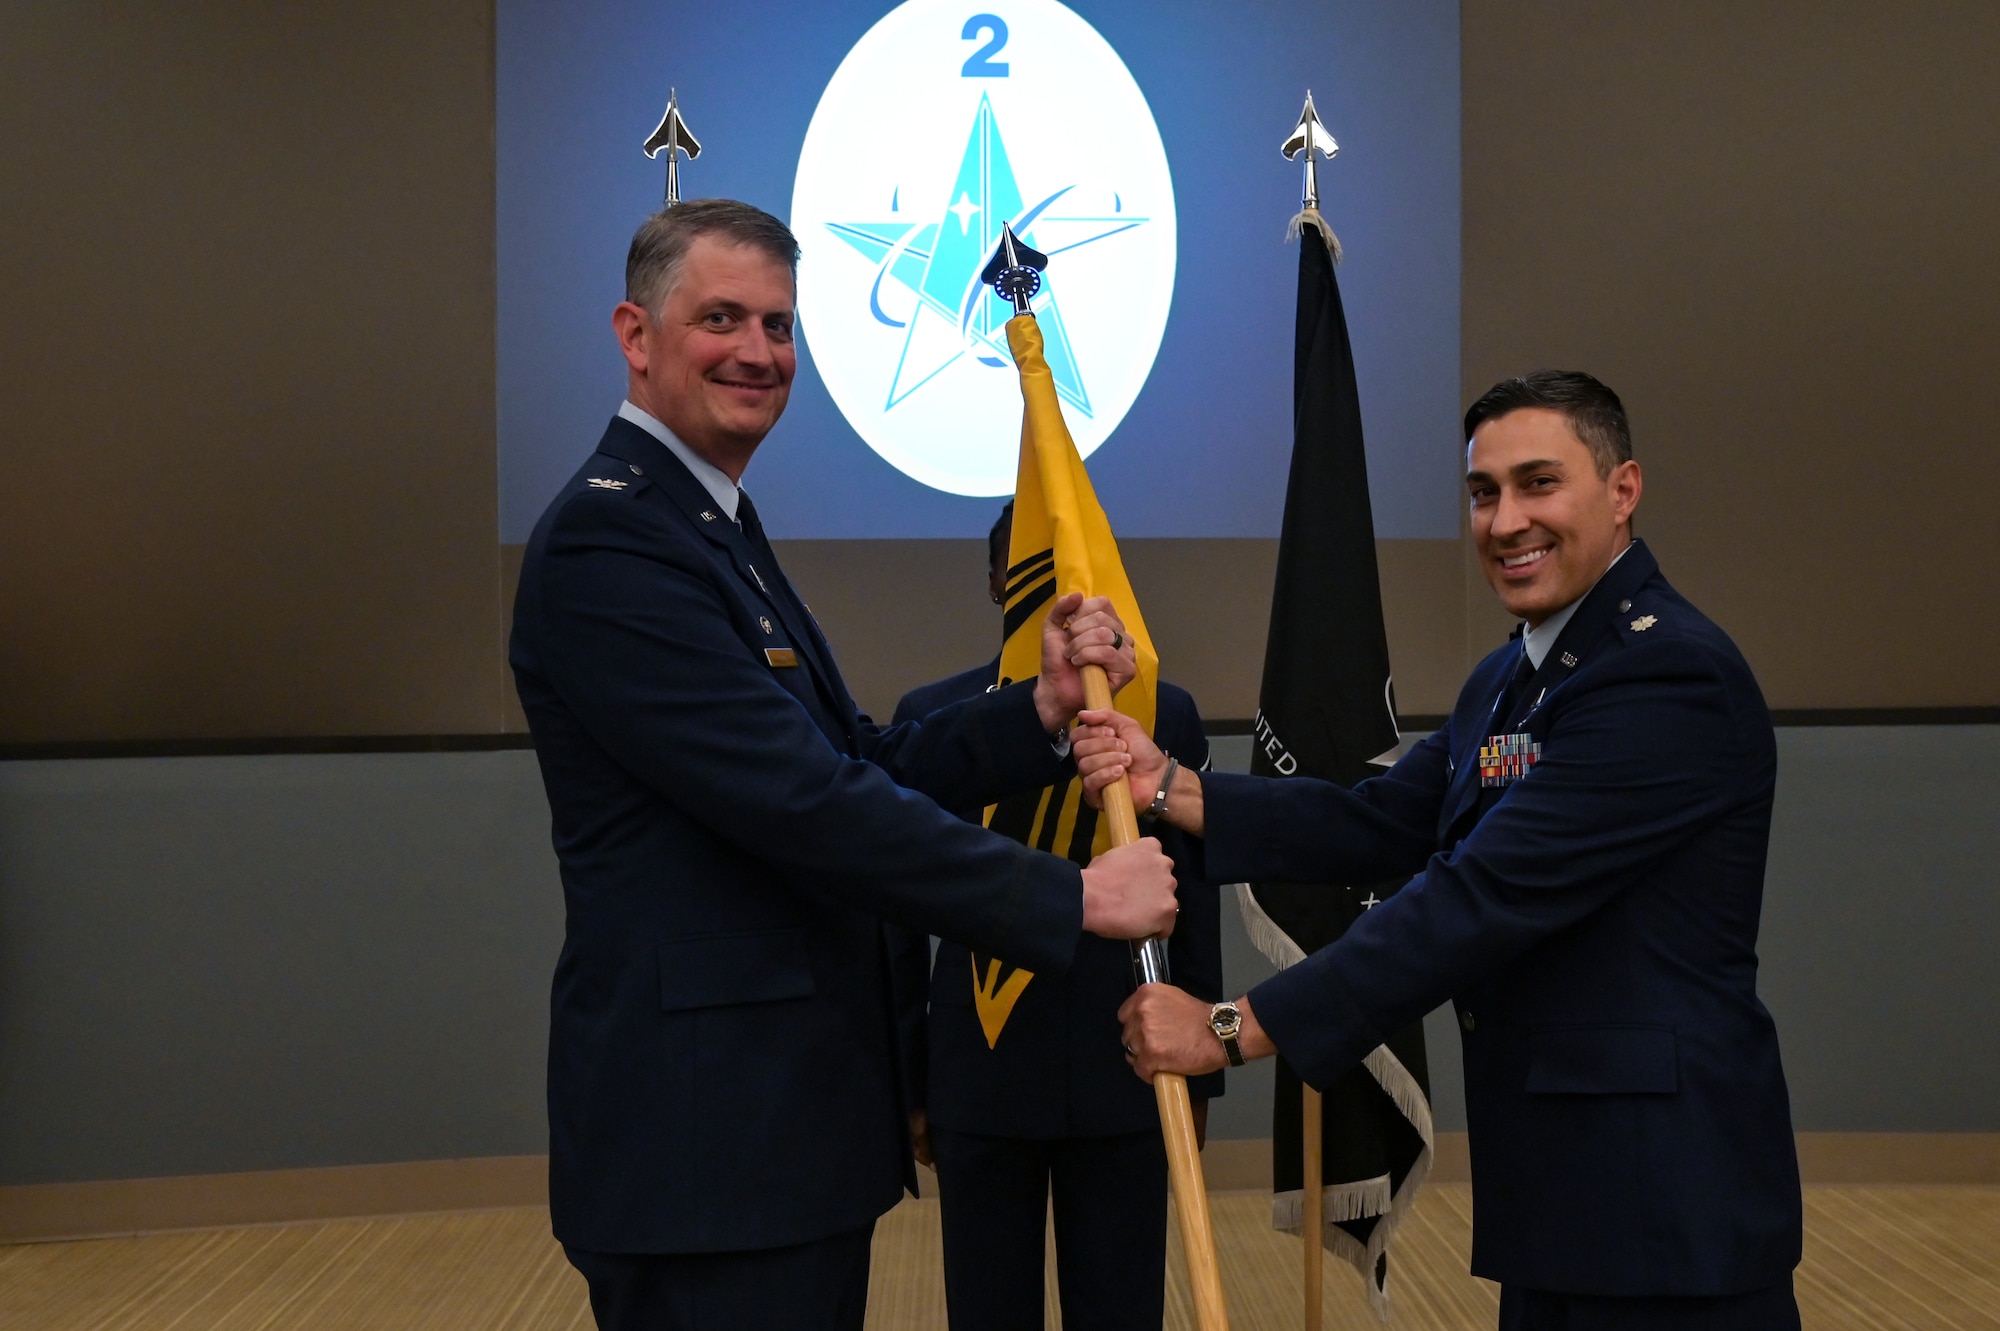 U.S. Space Force Col. Robert Long, Space Launch Delta 30 commander, hands over command from U.S. Space Force Force Lt. Col. Nicholas M. Somerman, outgoing 2nd Range Operations Squadron commander, to incoming commander U.S. Space Force Lt. Col. Darin J. Lister at the 533rd Training Squadron auditorium on Vandenberg Space Force Base, Calif., June 8, 2023. (U.S. Space Force photo by Senior Airman Rocio Romo)